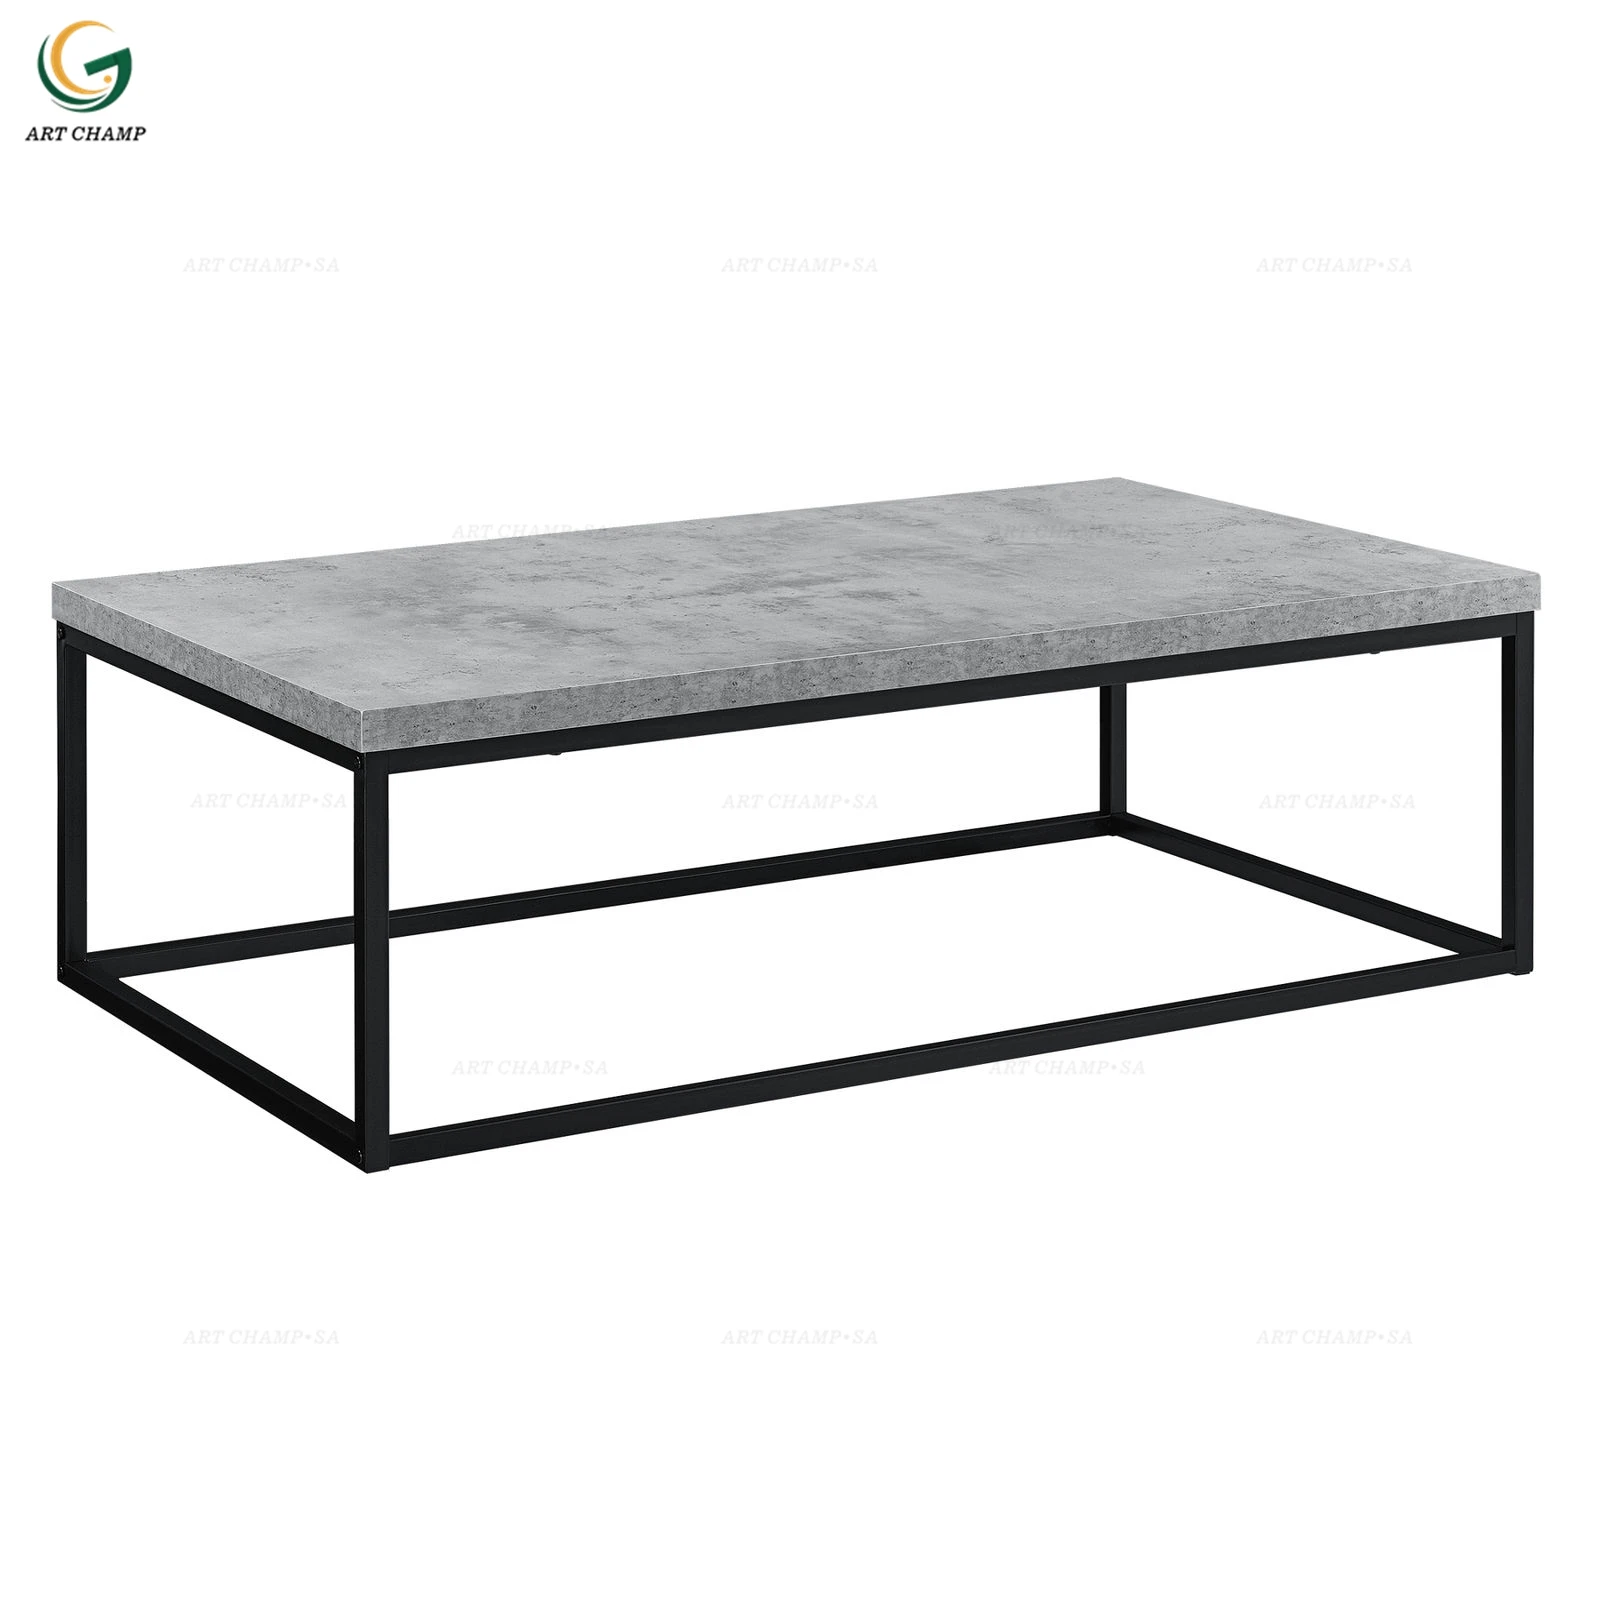 Concrete Looking Modern Mdf Coffee Table Buy Coffee Table Product On Alibaba Com